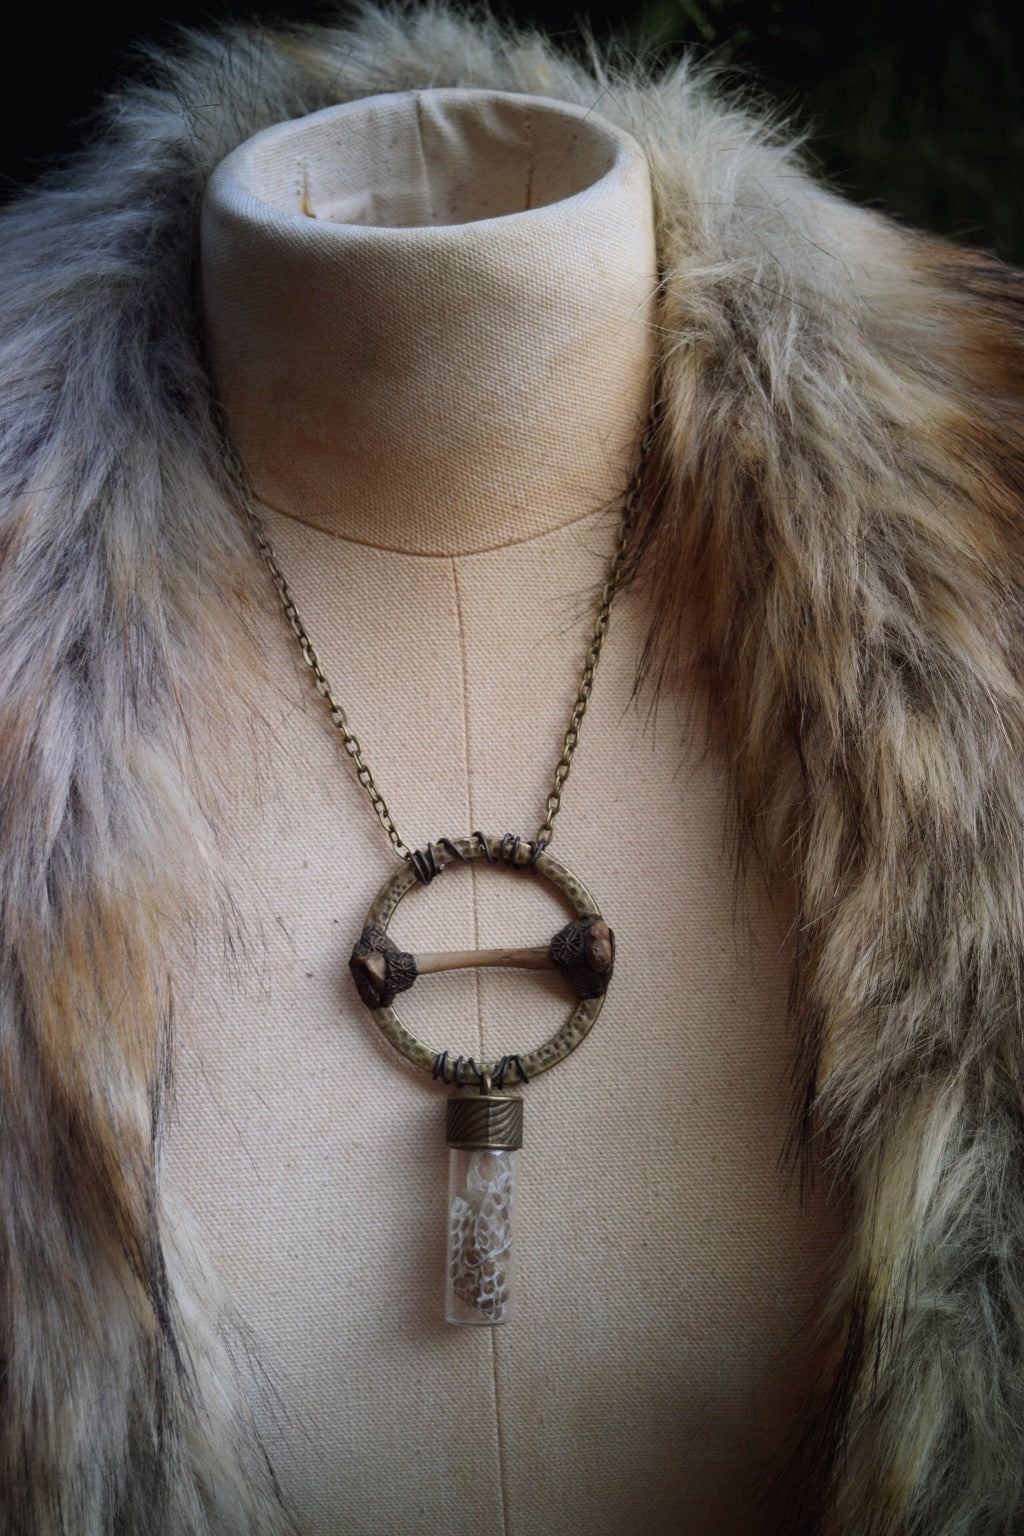 Inanna Necklace for Love, Courage  and Rebirth